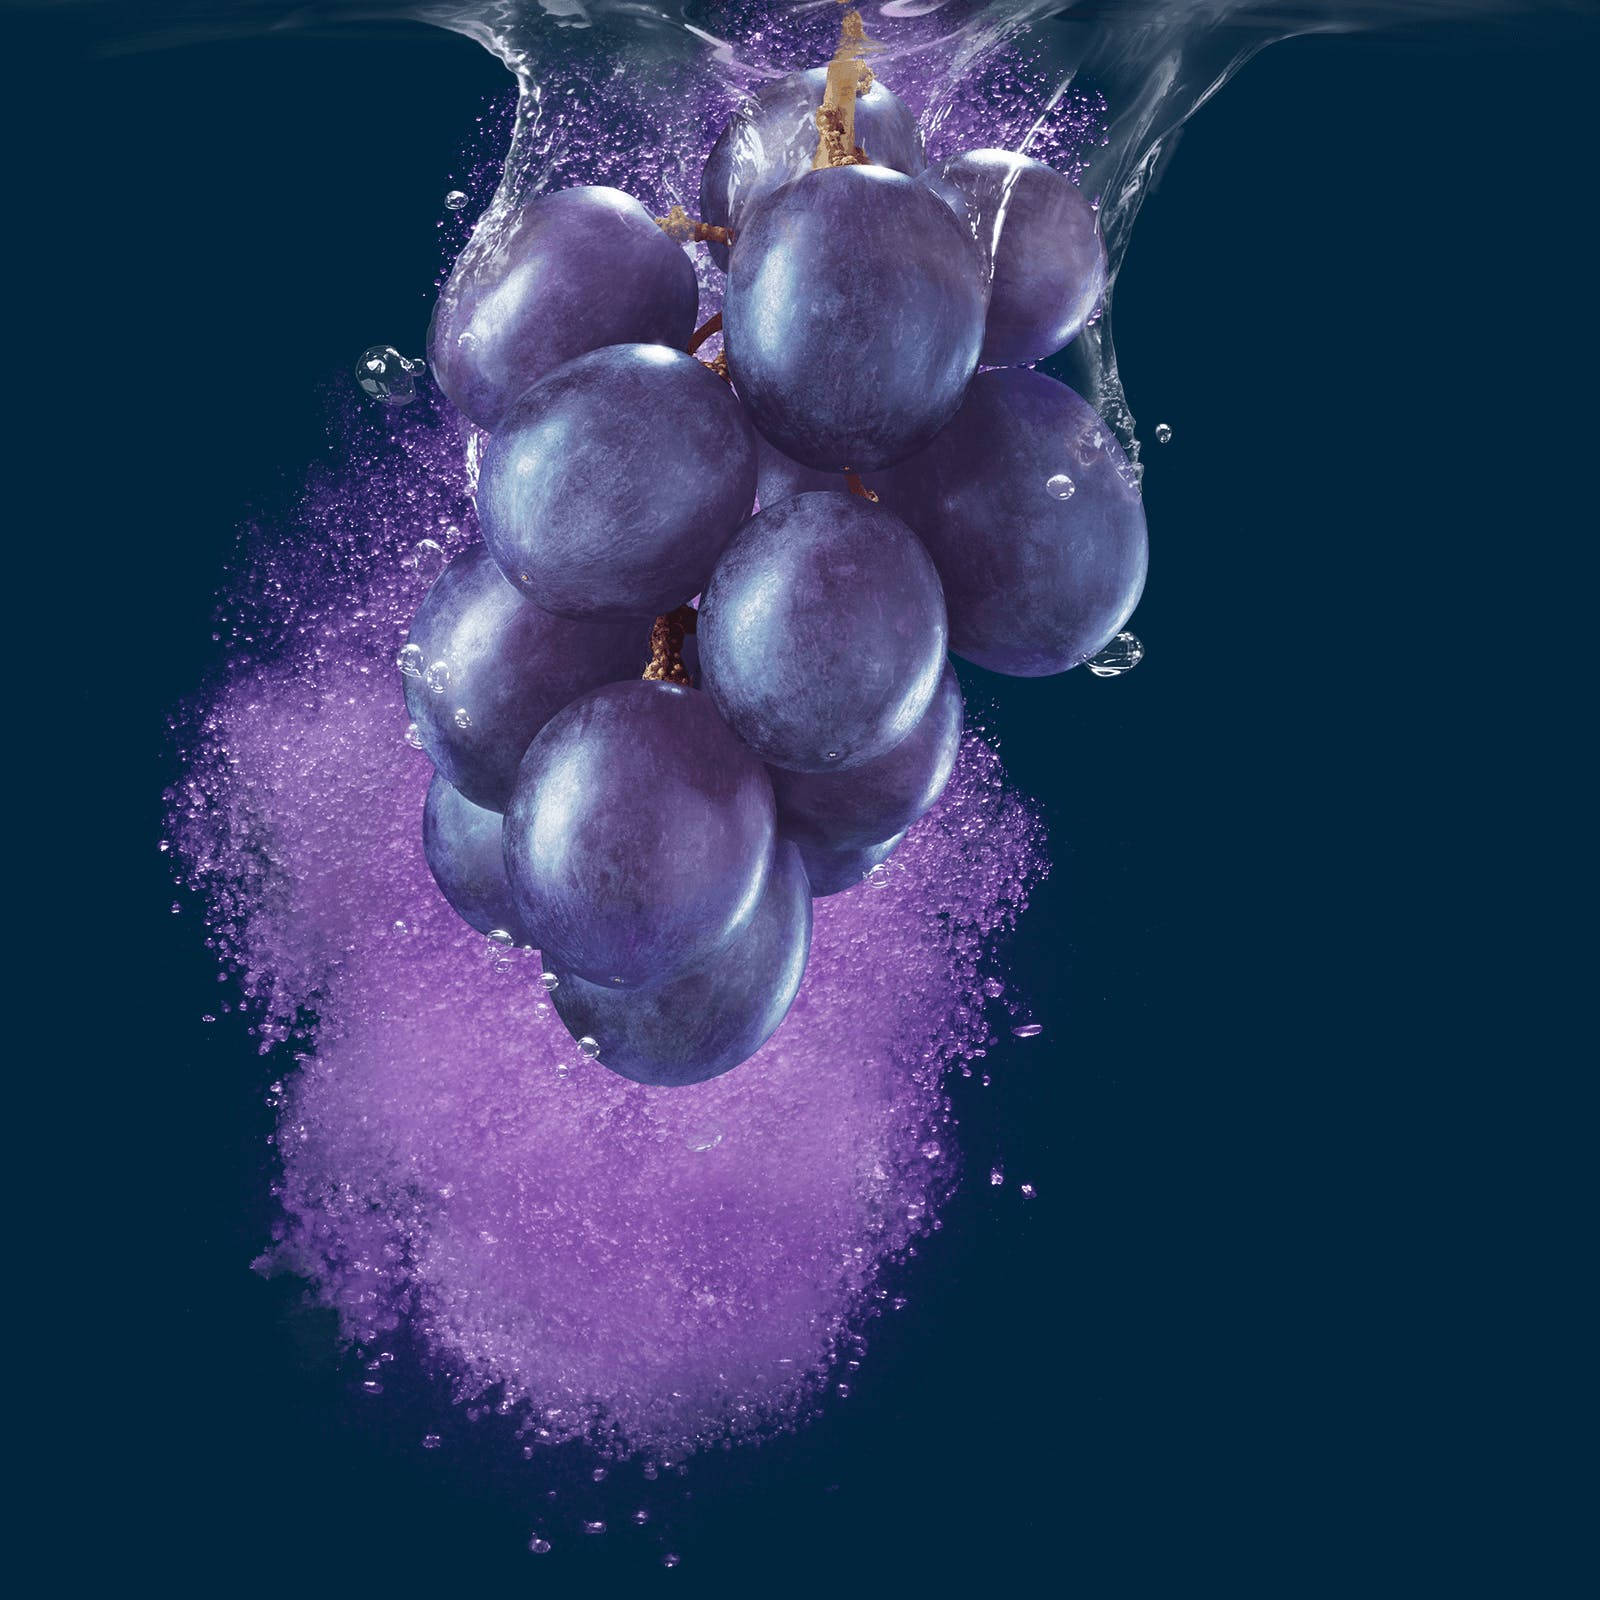 Fresh Grapes Soaked in Water Wallpaper